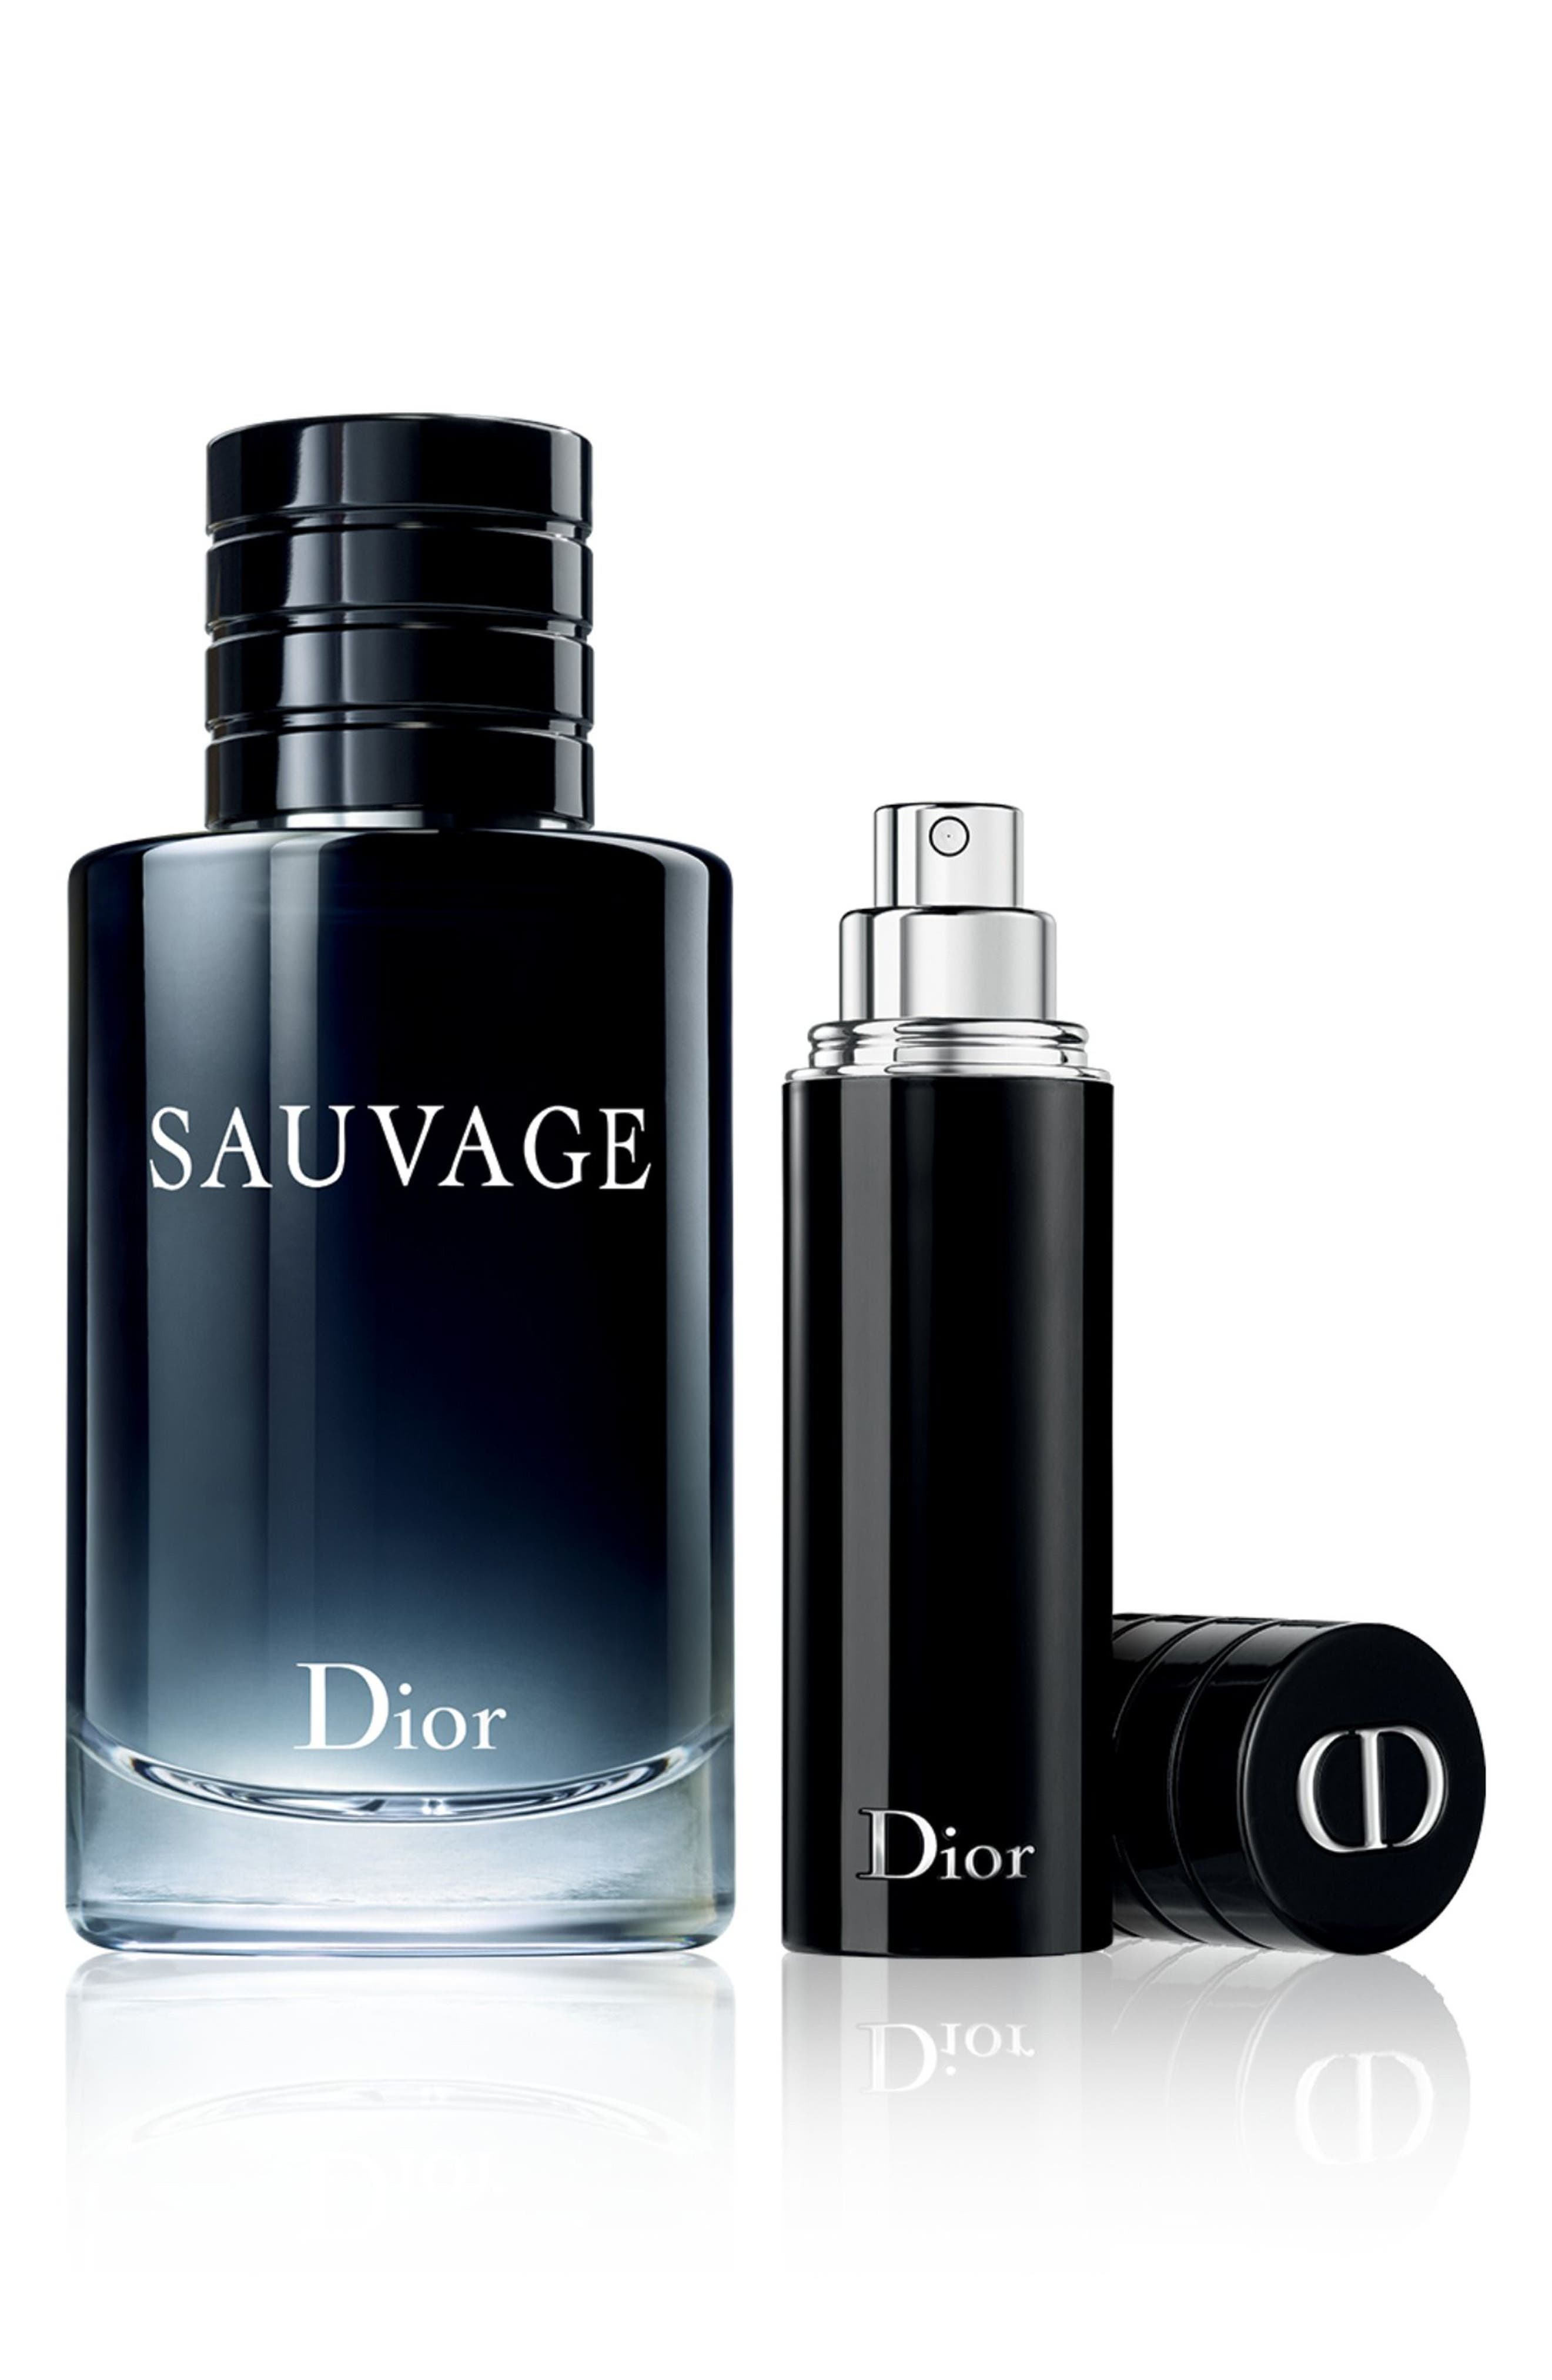 dior sauvage travel kit with shower gel gift